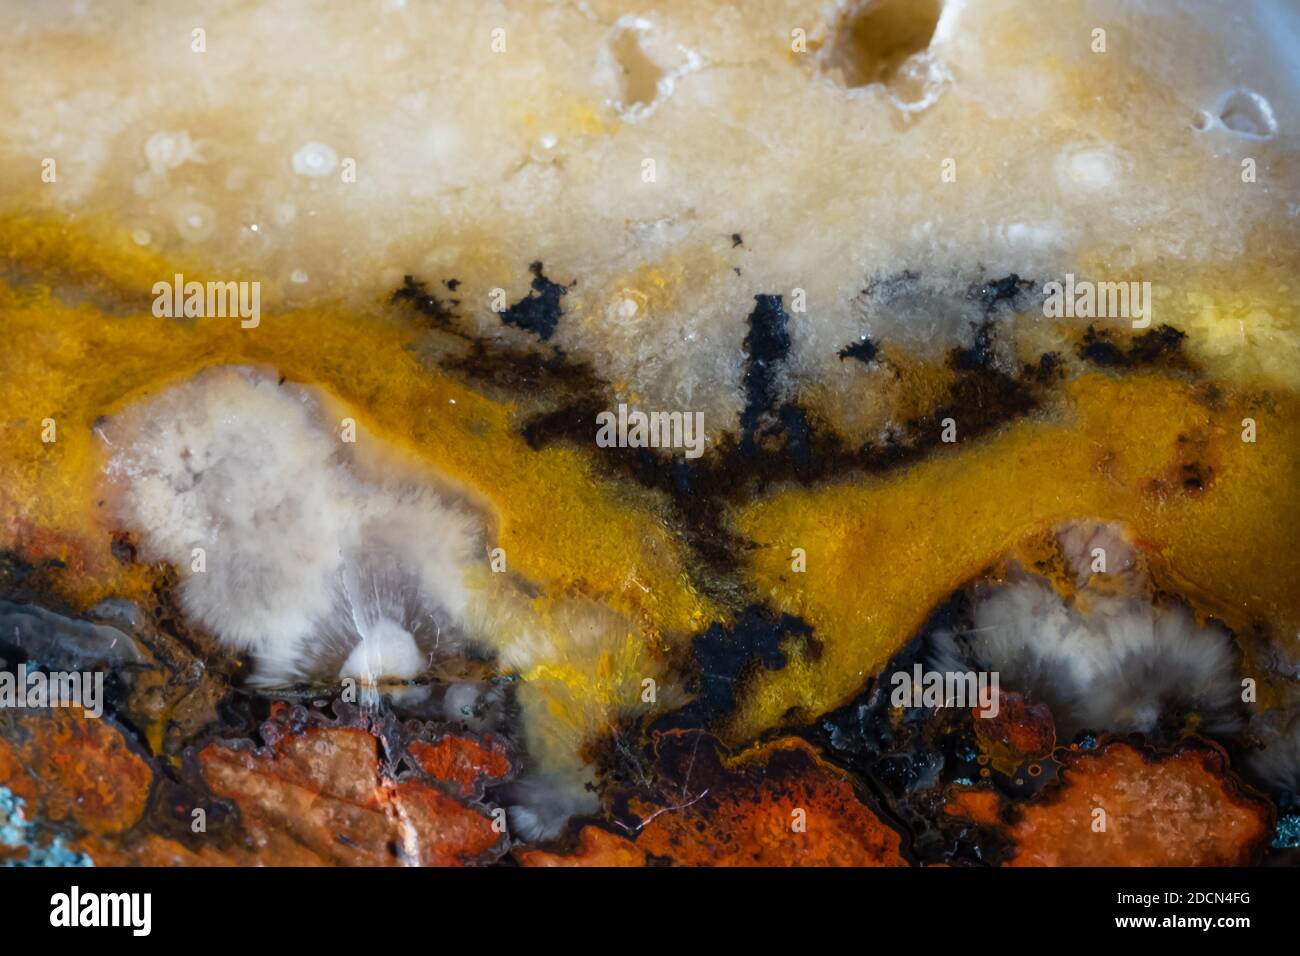 Natural stone - Agate with a white-red-yellow pattern Stock Photo